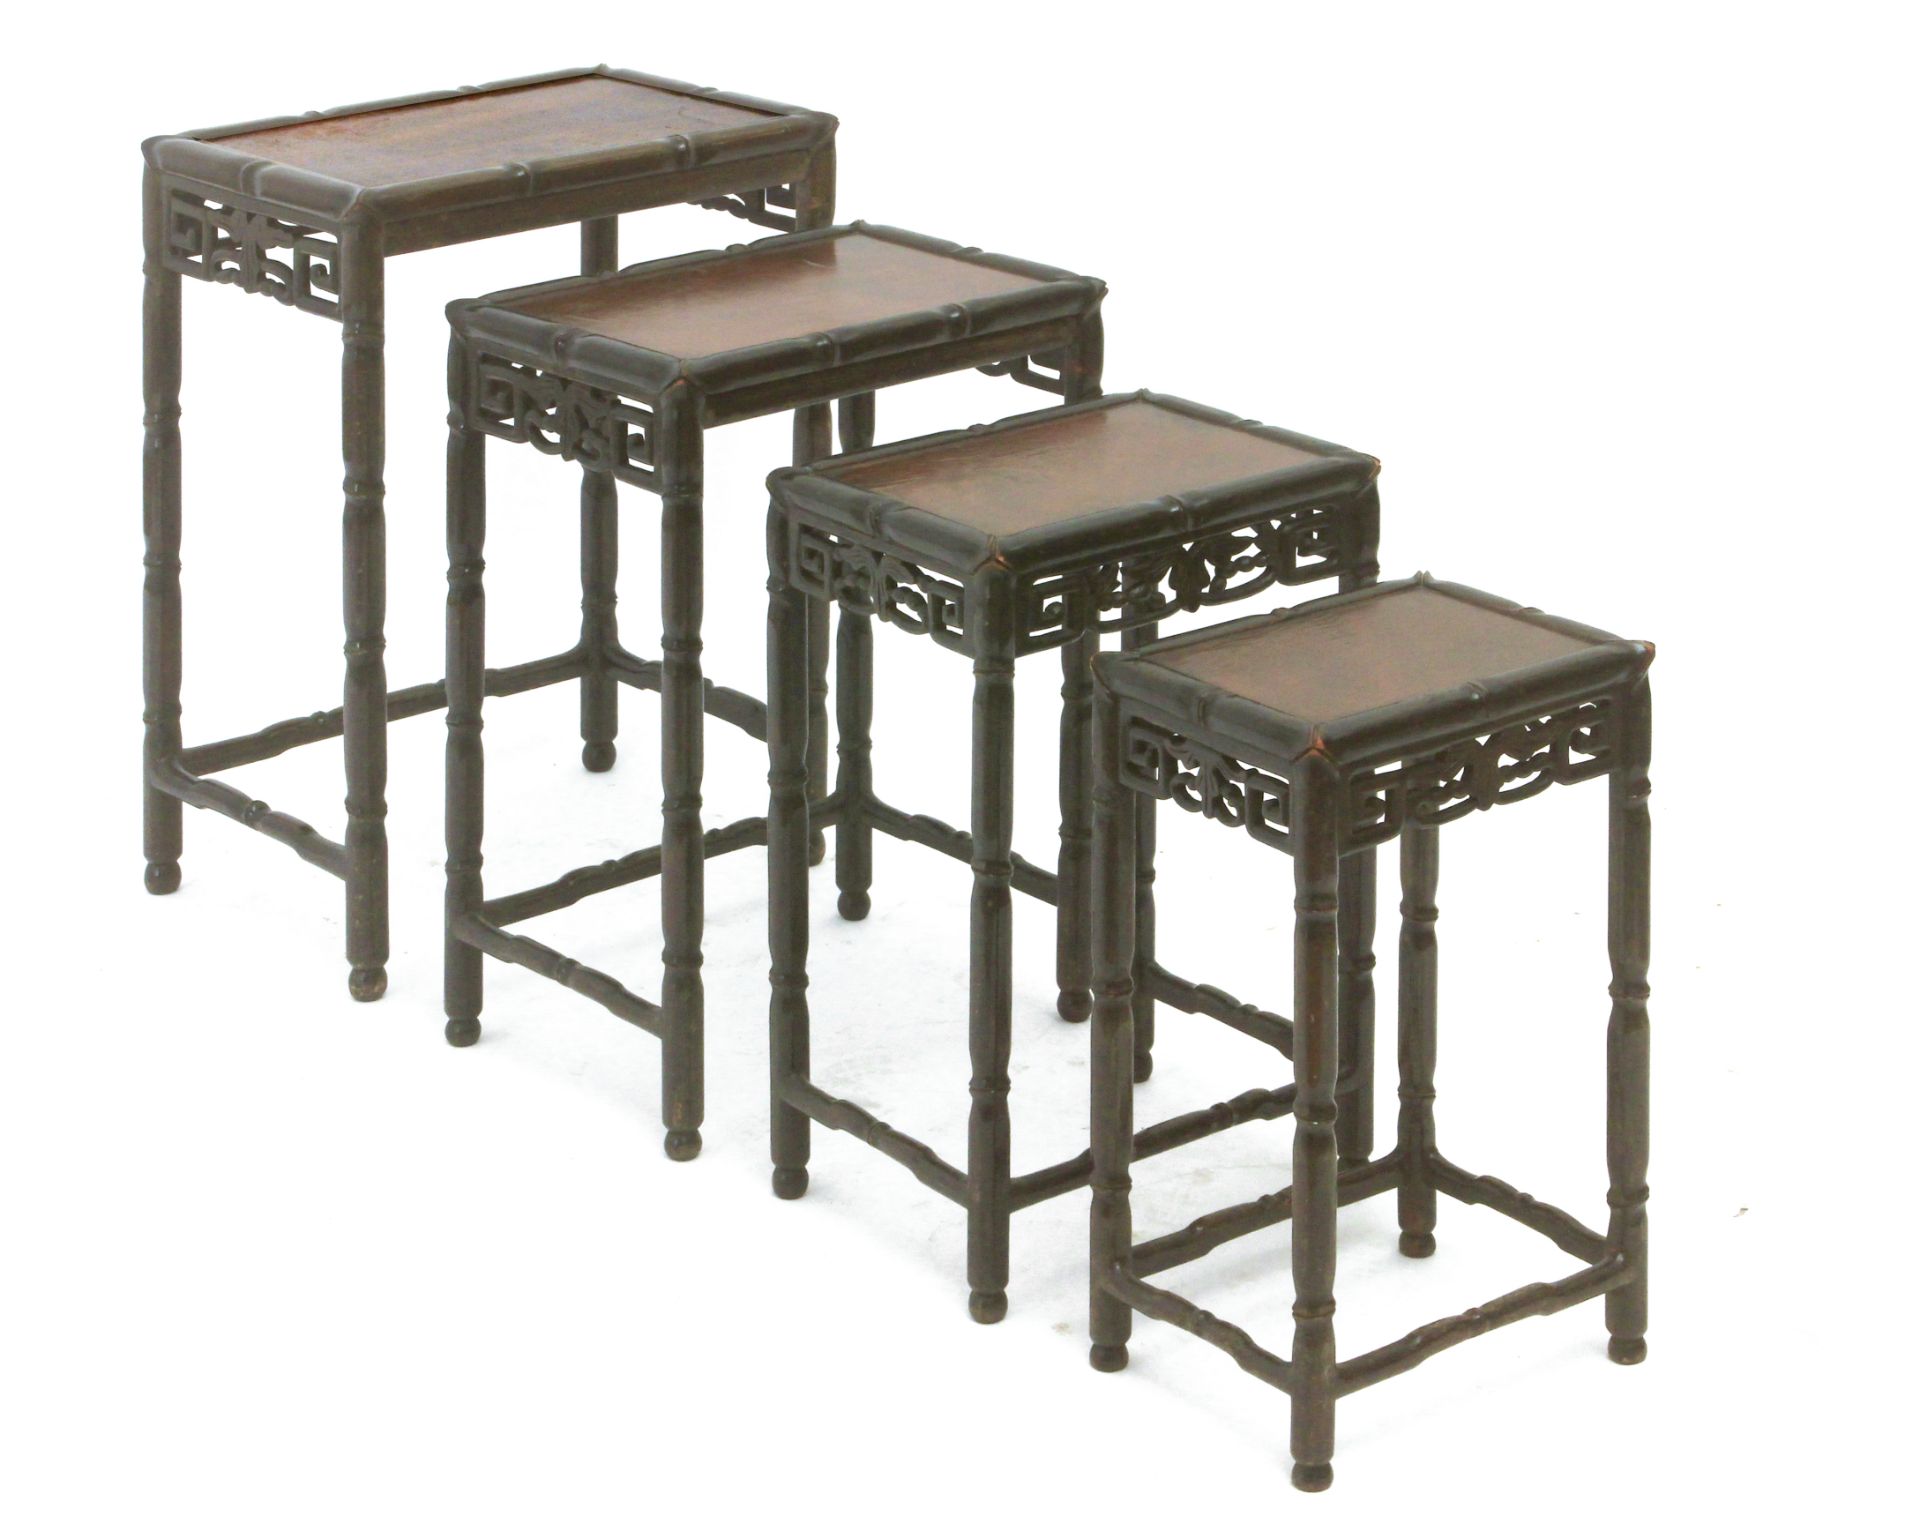 A set of four 19th century Chinese nest tables from Qing Dynasty